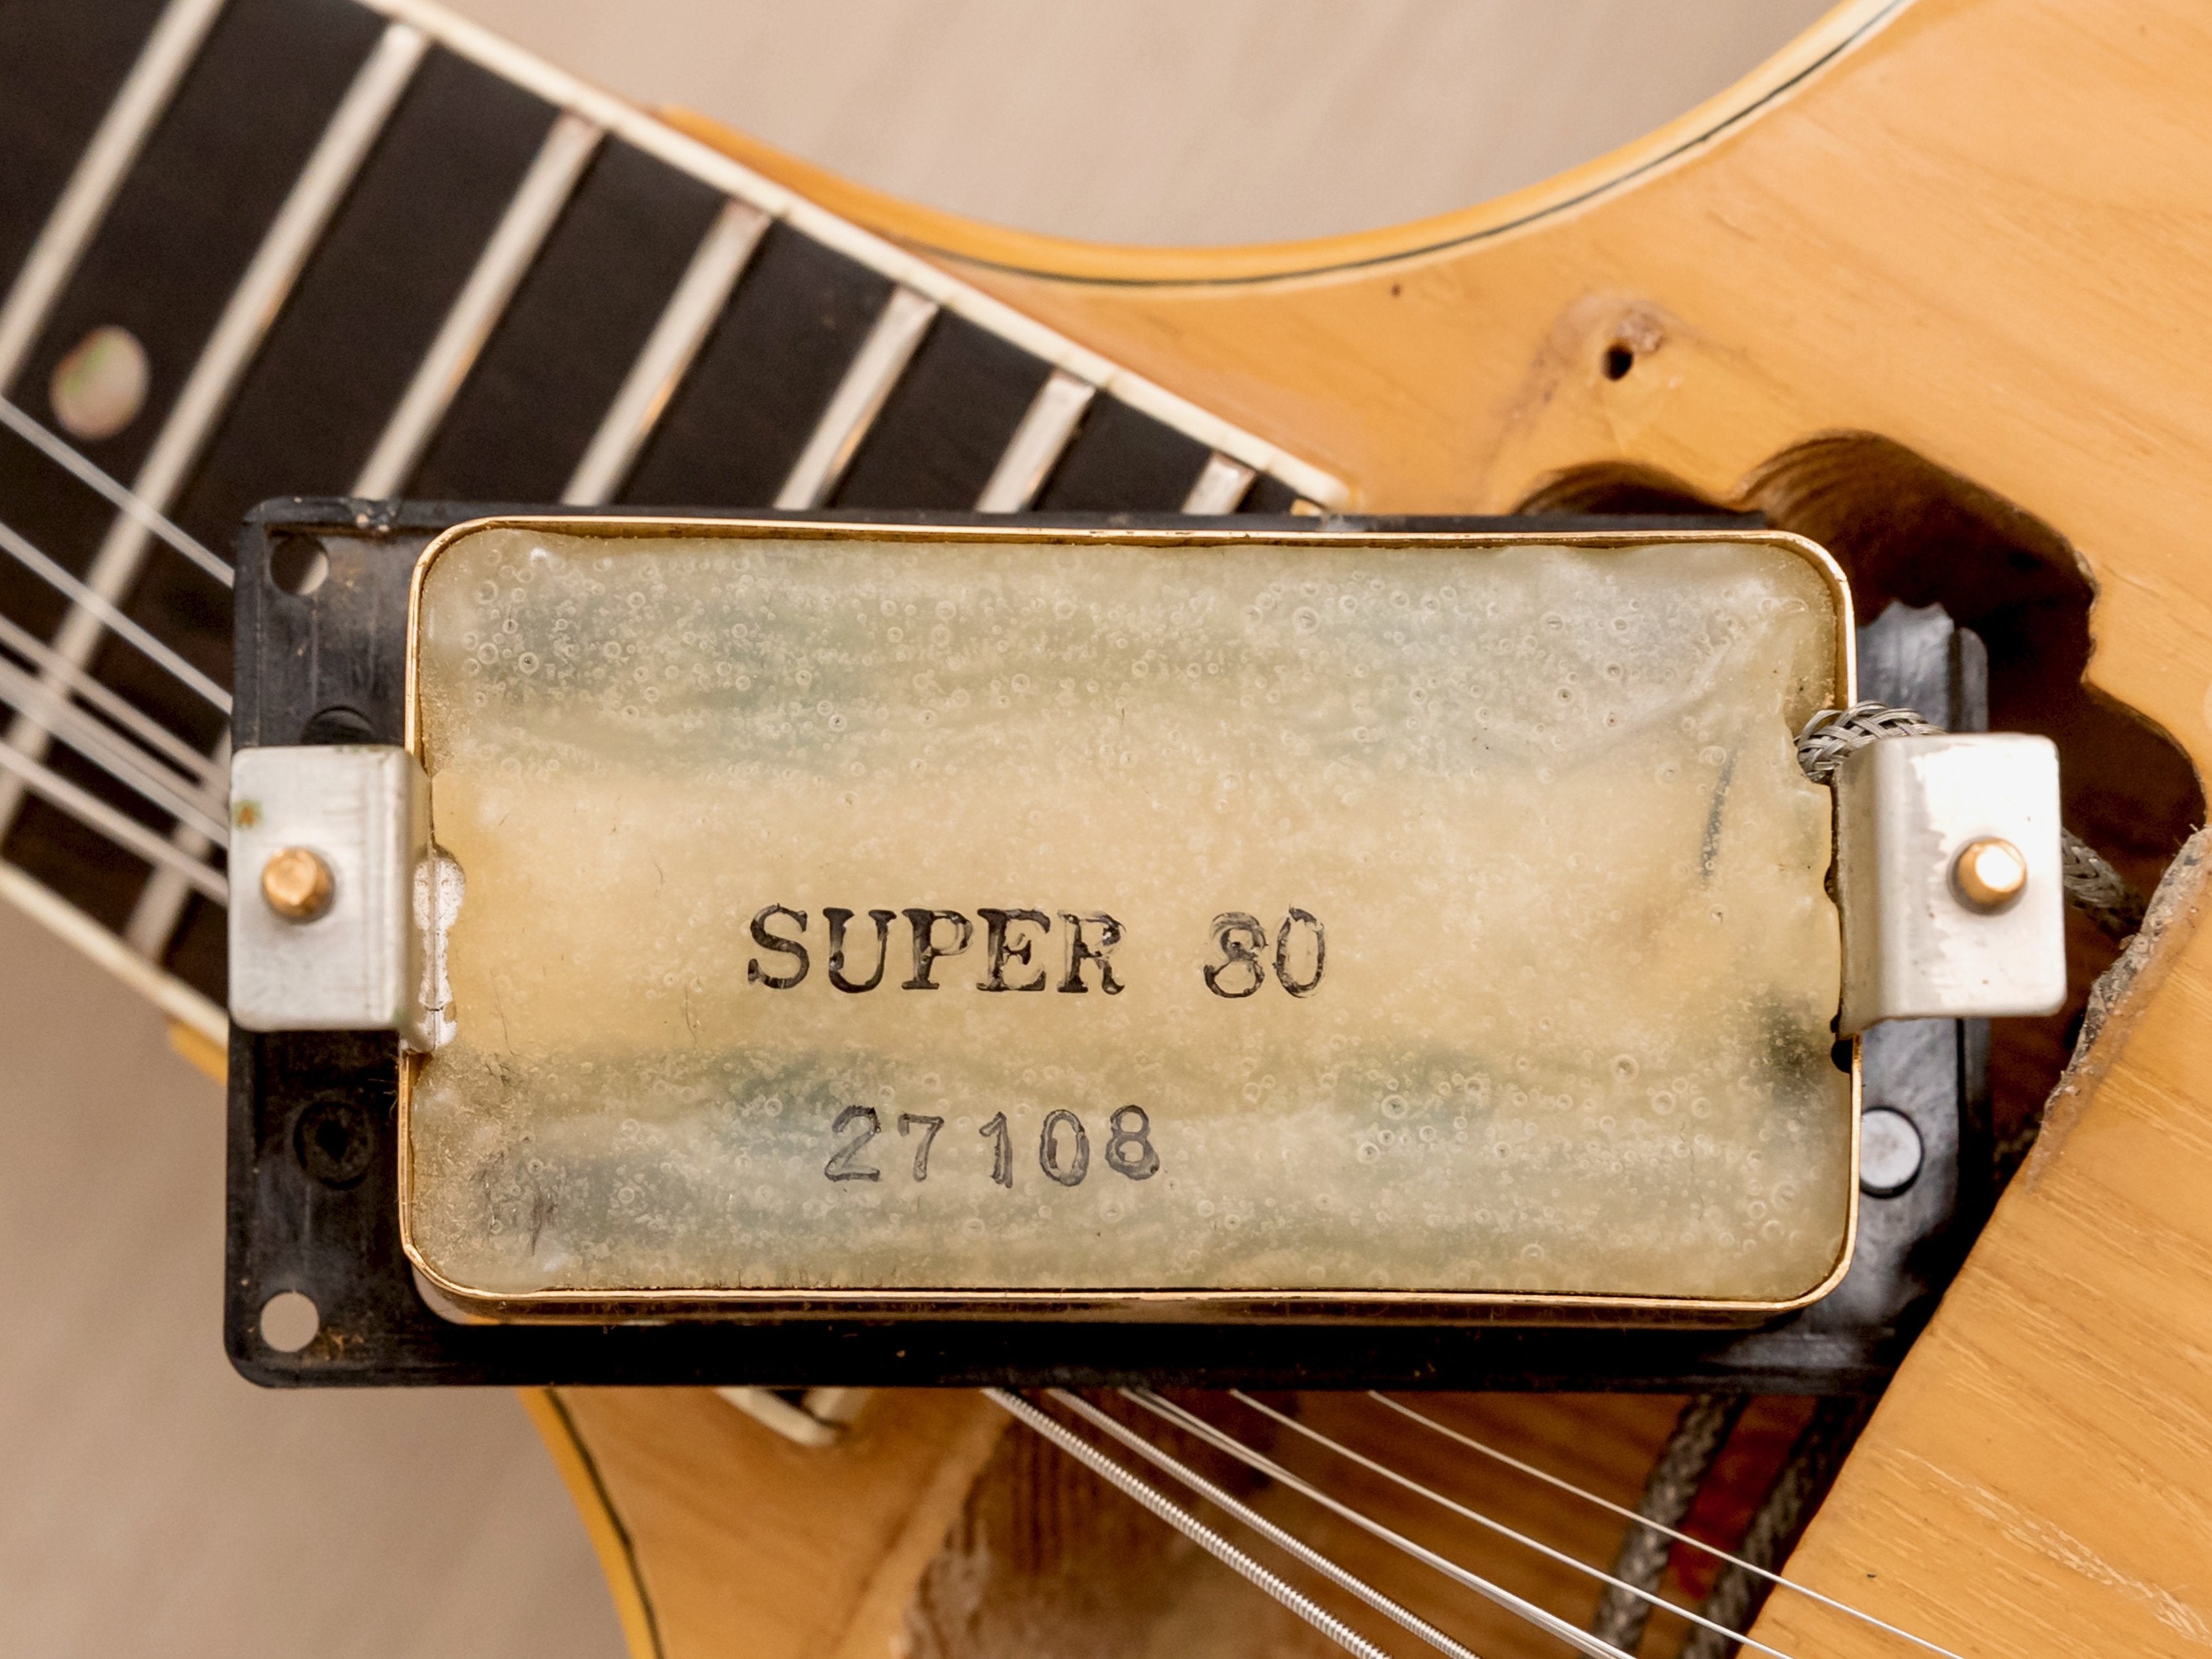 1977 Ibanez Professional Series Model 2680 Bob Weir Signature w/ Super 80 Flying Fingers, Case